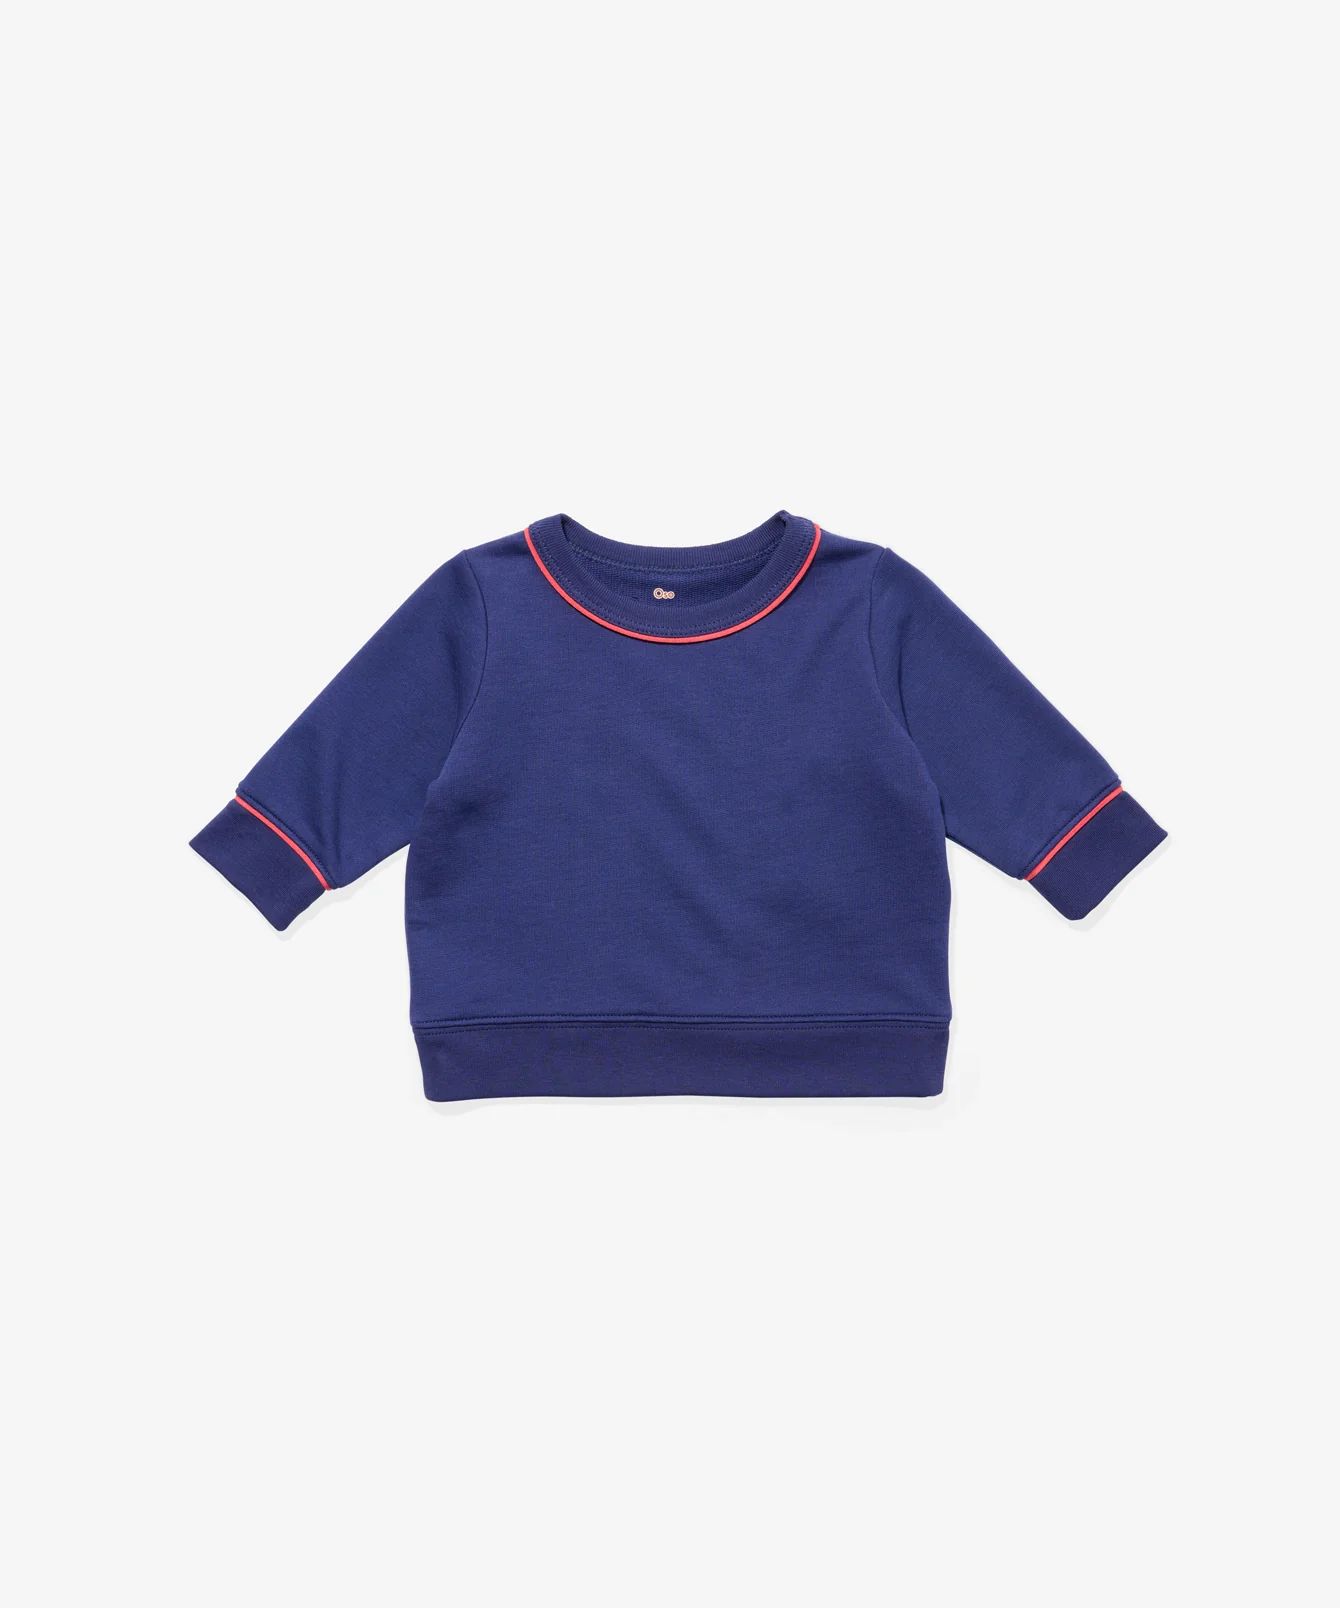 Super-Comfortable Baby Sweatshirt in Navy | Oso and Me | Oso & Me